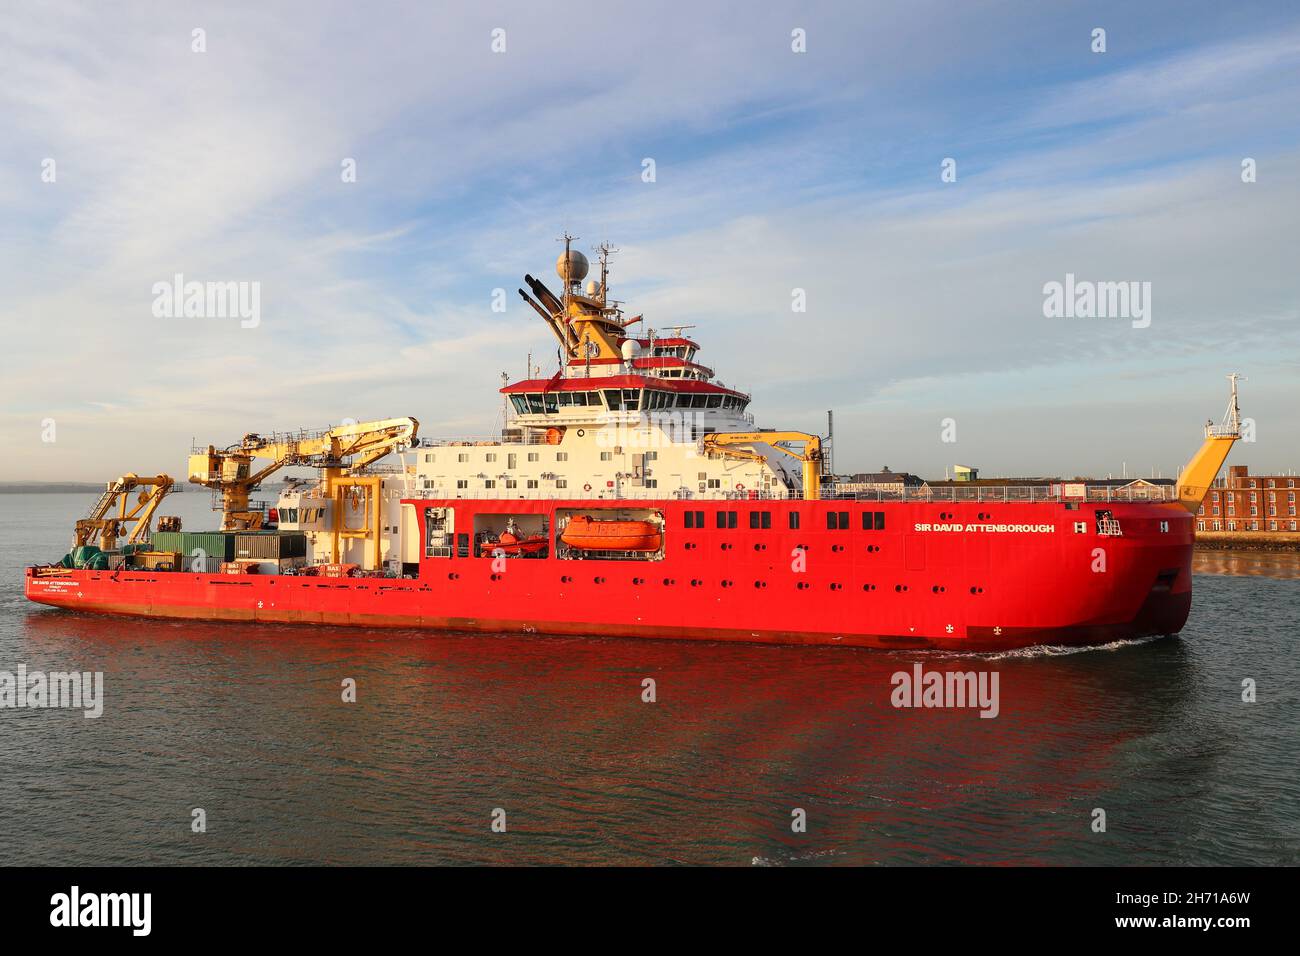 Sir David Attenborough research vessel ship pictured arriving at Portsmouth, Hampshire, UK Stock Photo